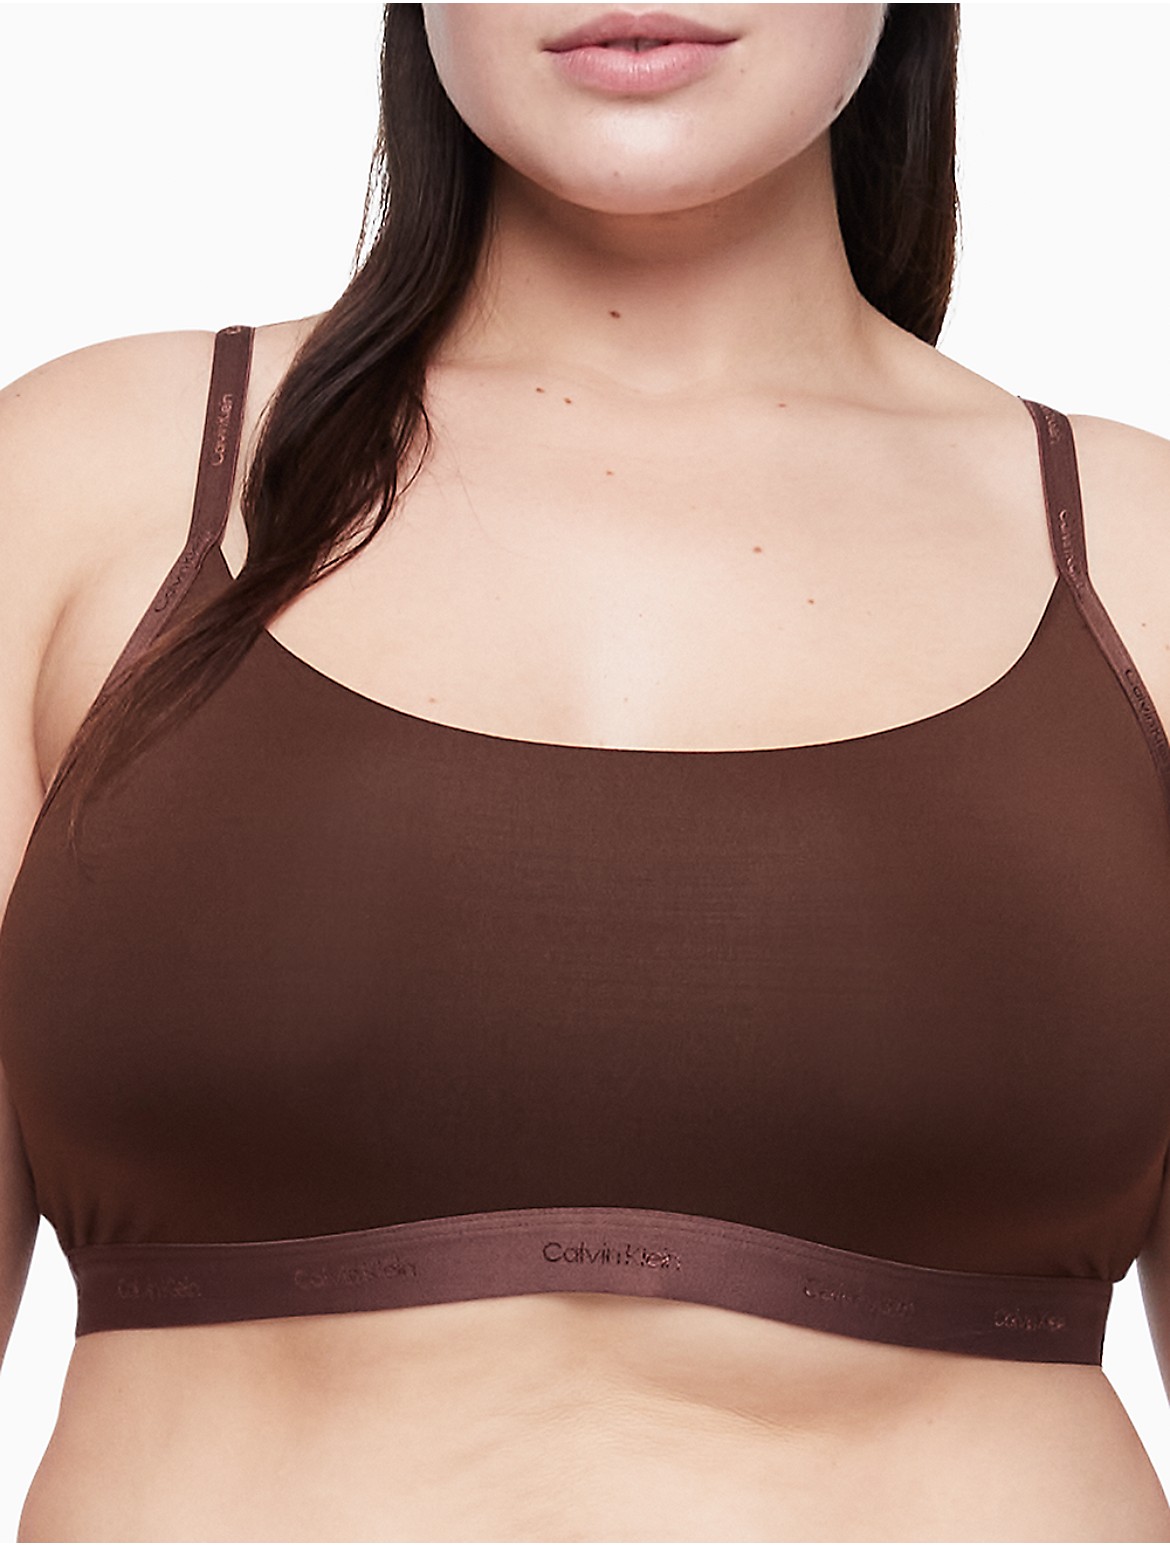 Calvin Klein Women's Form to Body Natural Plus Unlined Bralette - Brown - 1X